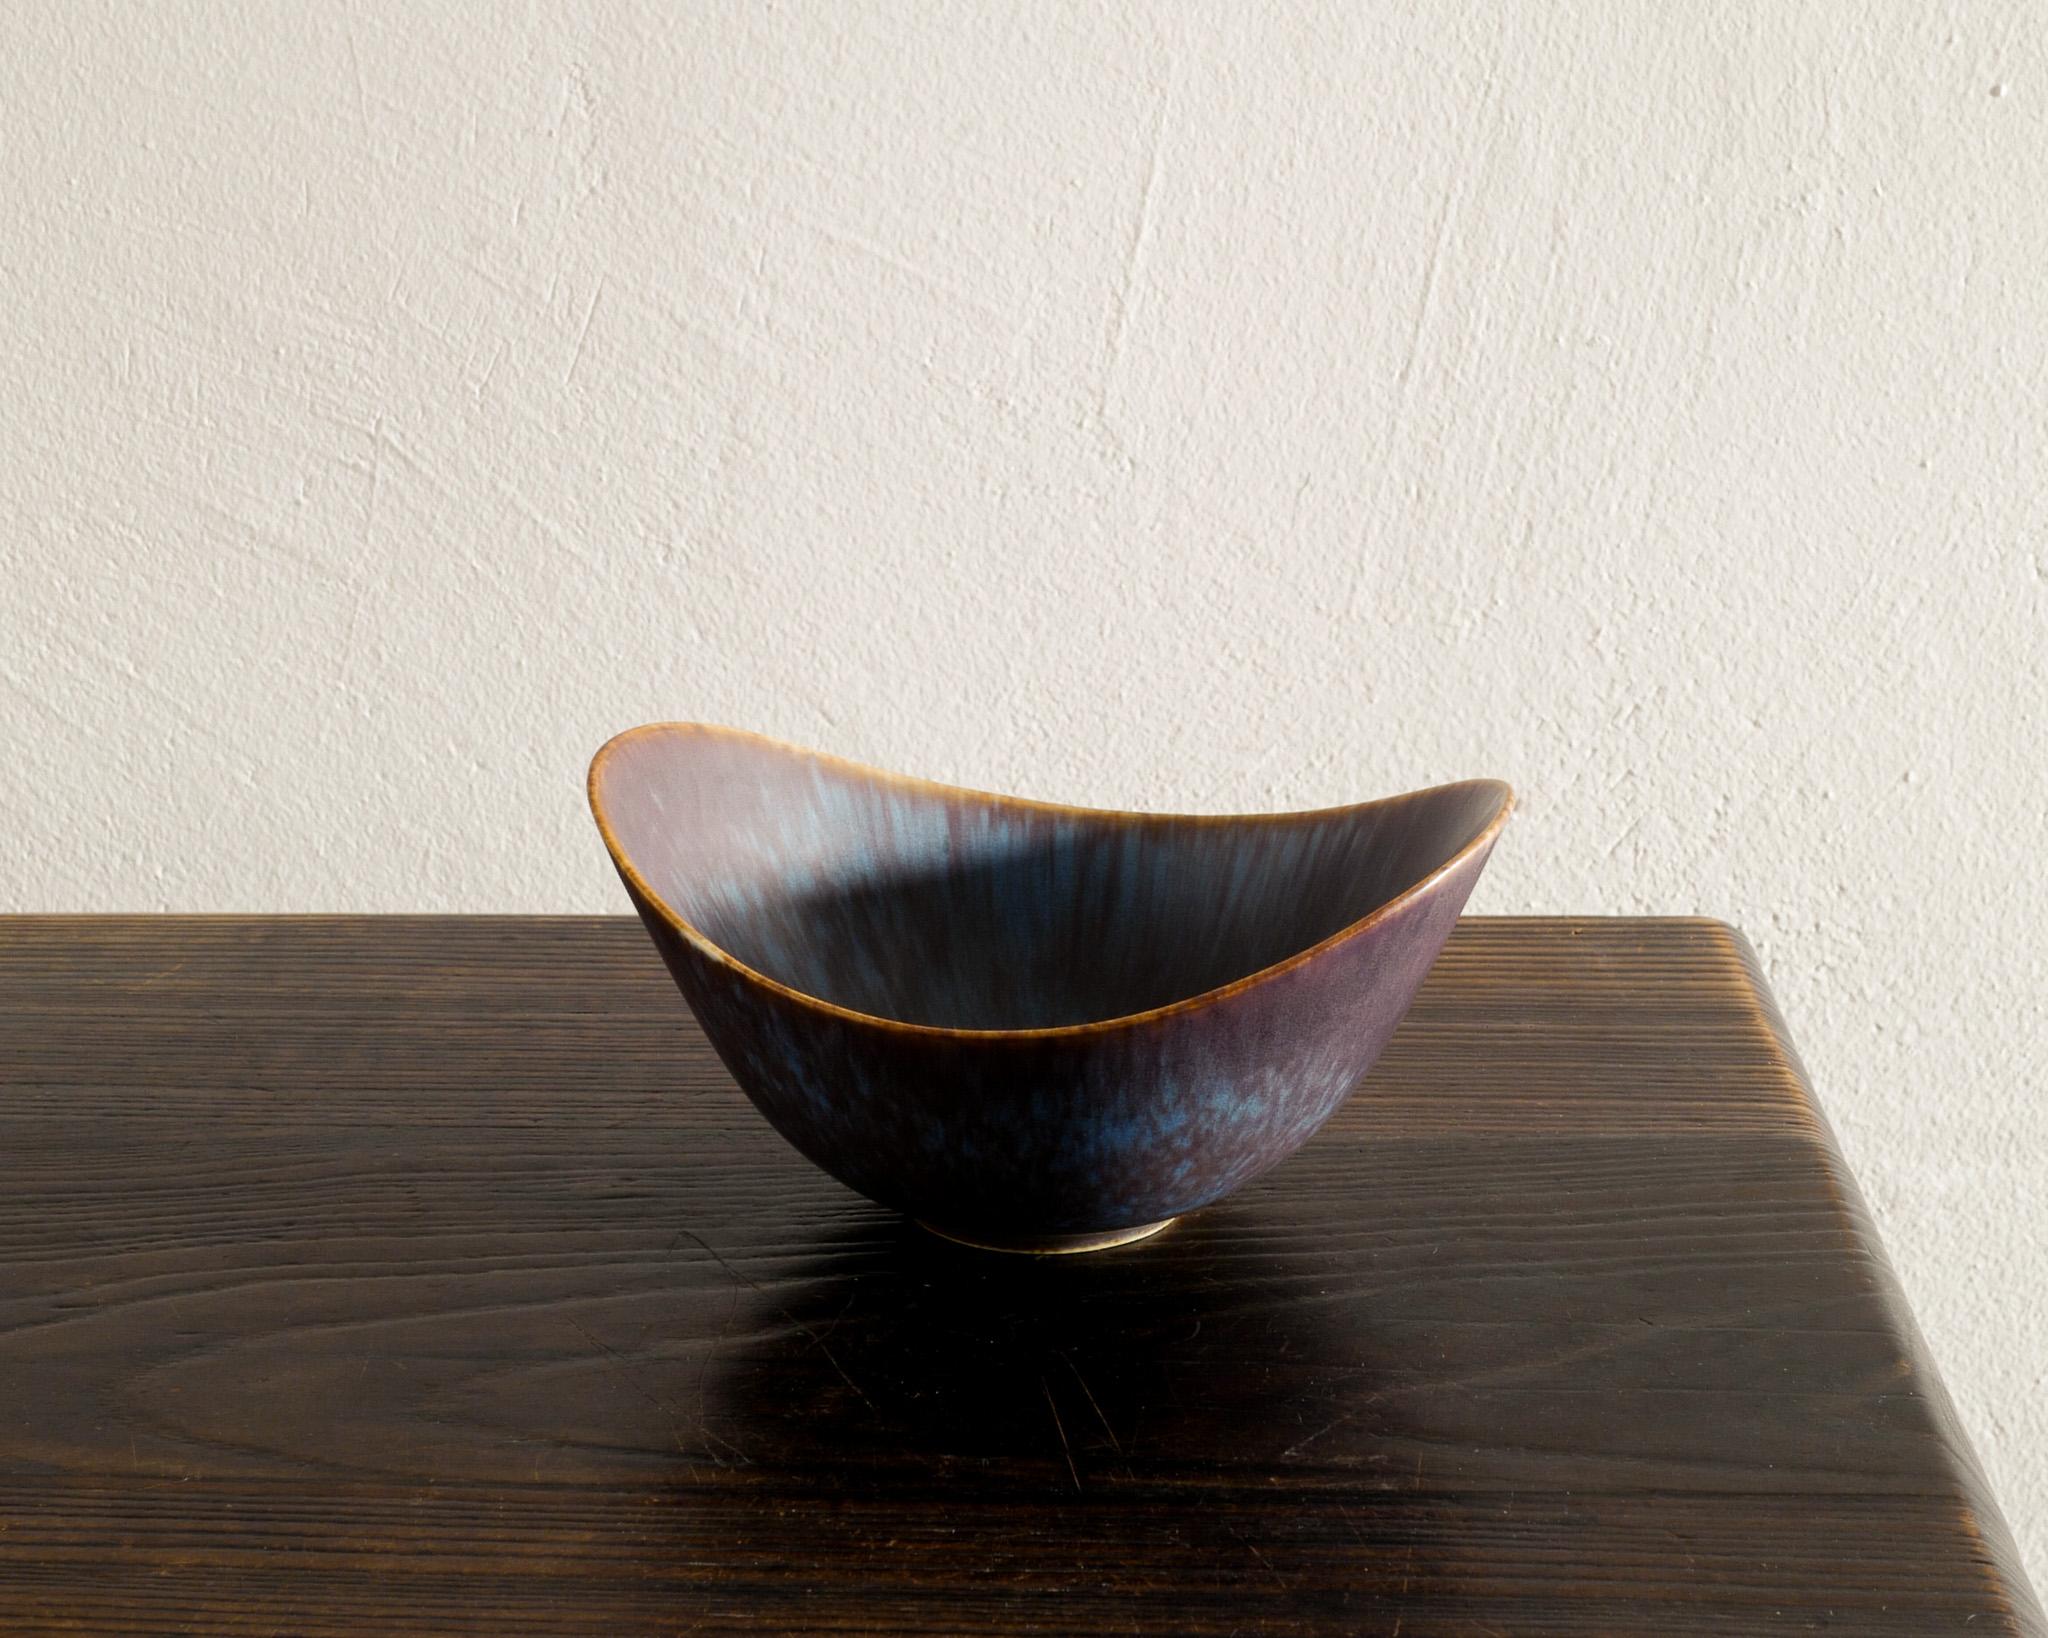 Rare ceramic / stoneware bowl in blue brown glaze by Gunnar Nylund produced by Rörstrand Sweden 1950s. In good condition. Signed 